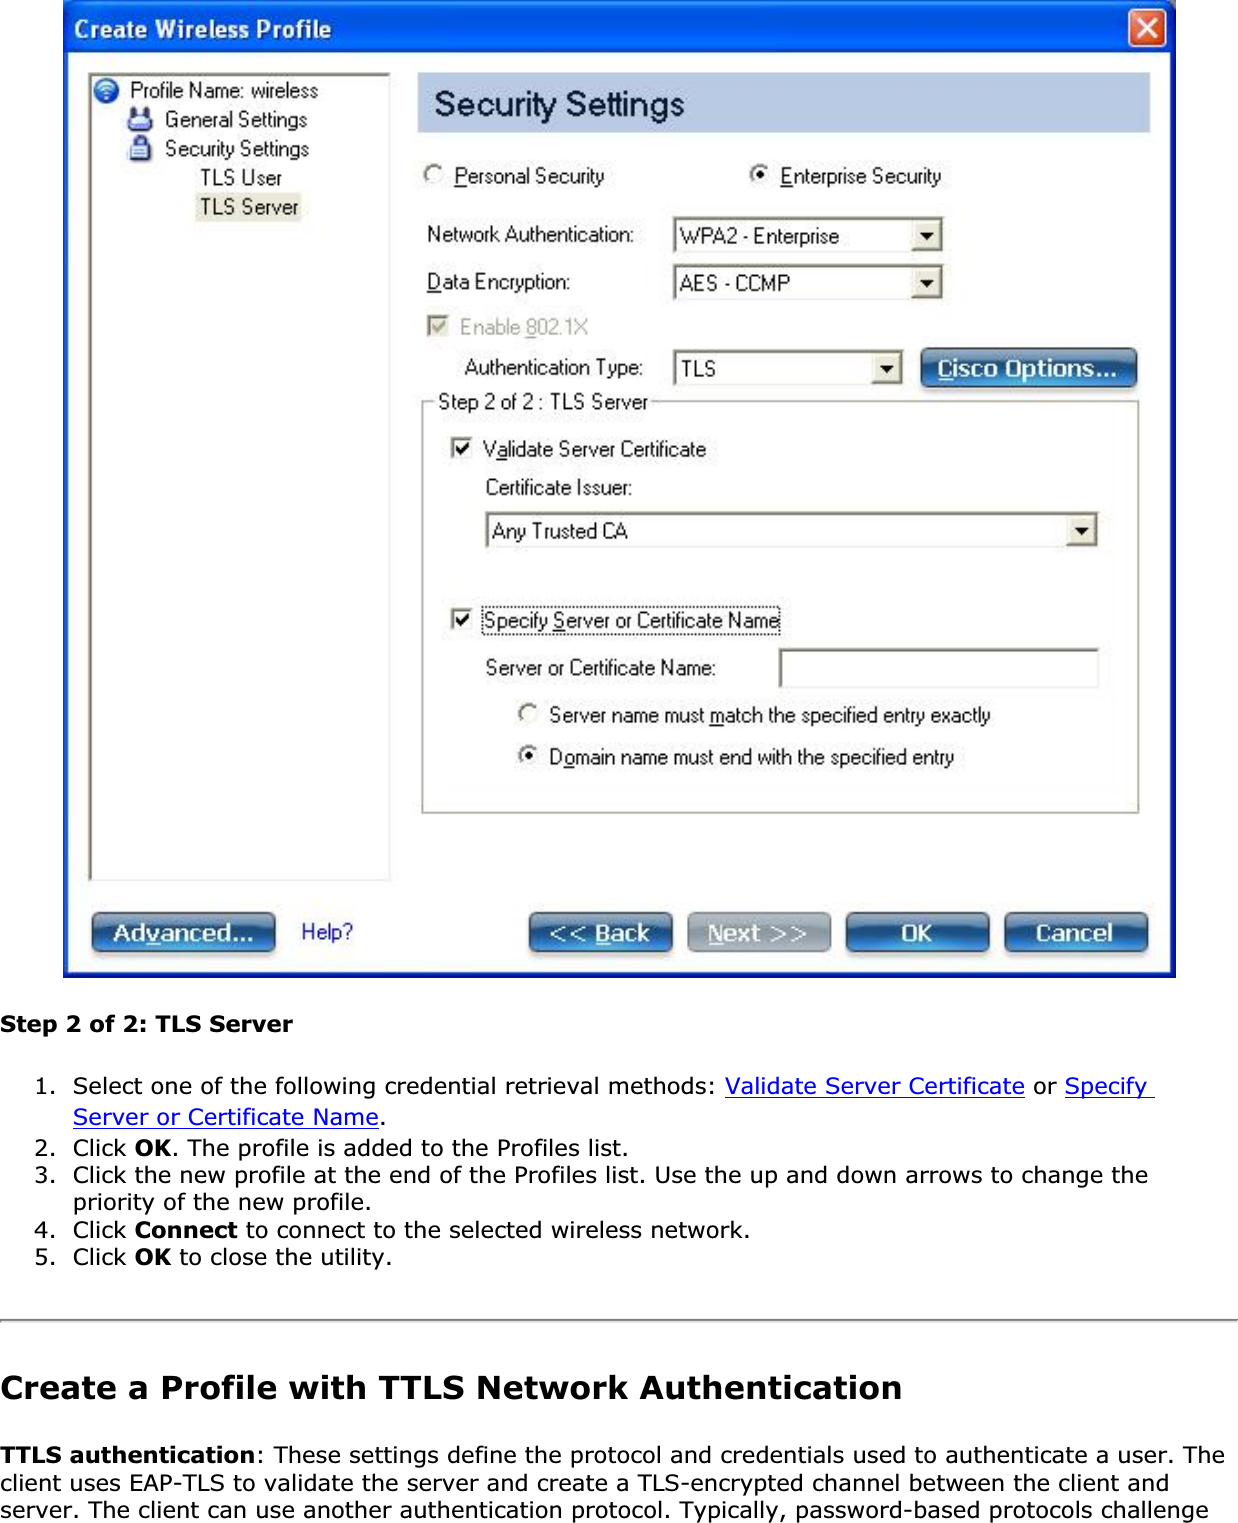 Step 2 of 2: TLS Server1. Select one of the following credential retrieval methods: Validate Server Certificate or SpecifyServer or Certificate Name.2. Click OK. The profile is added to the Profiles list. 3. Click the new profile at the end of the Profiles list. Use the up and down arrows to change the priority of the new profile. 4. Click Connect to connect to the selected wireless network. 5. Click OK to close the utility. Create a Profile with TTLS Network Authentication TTLS authentication: These settings define the protocol and credentials used to authenticate a user. The client uses EAP-TLS to validate the server and create a TLS-encrypted channel between the client and server. The client can use another authentication protocol. Typically, password-based protocols challenge 